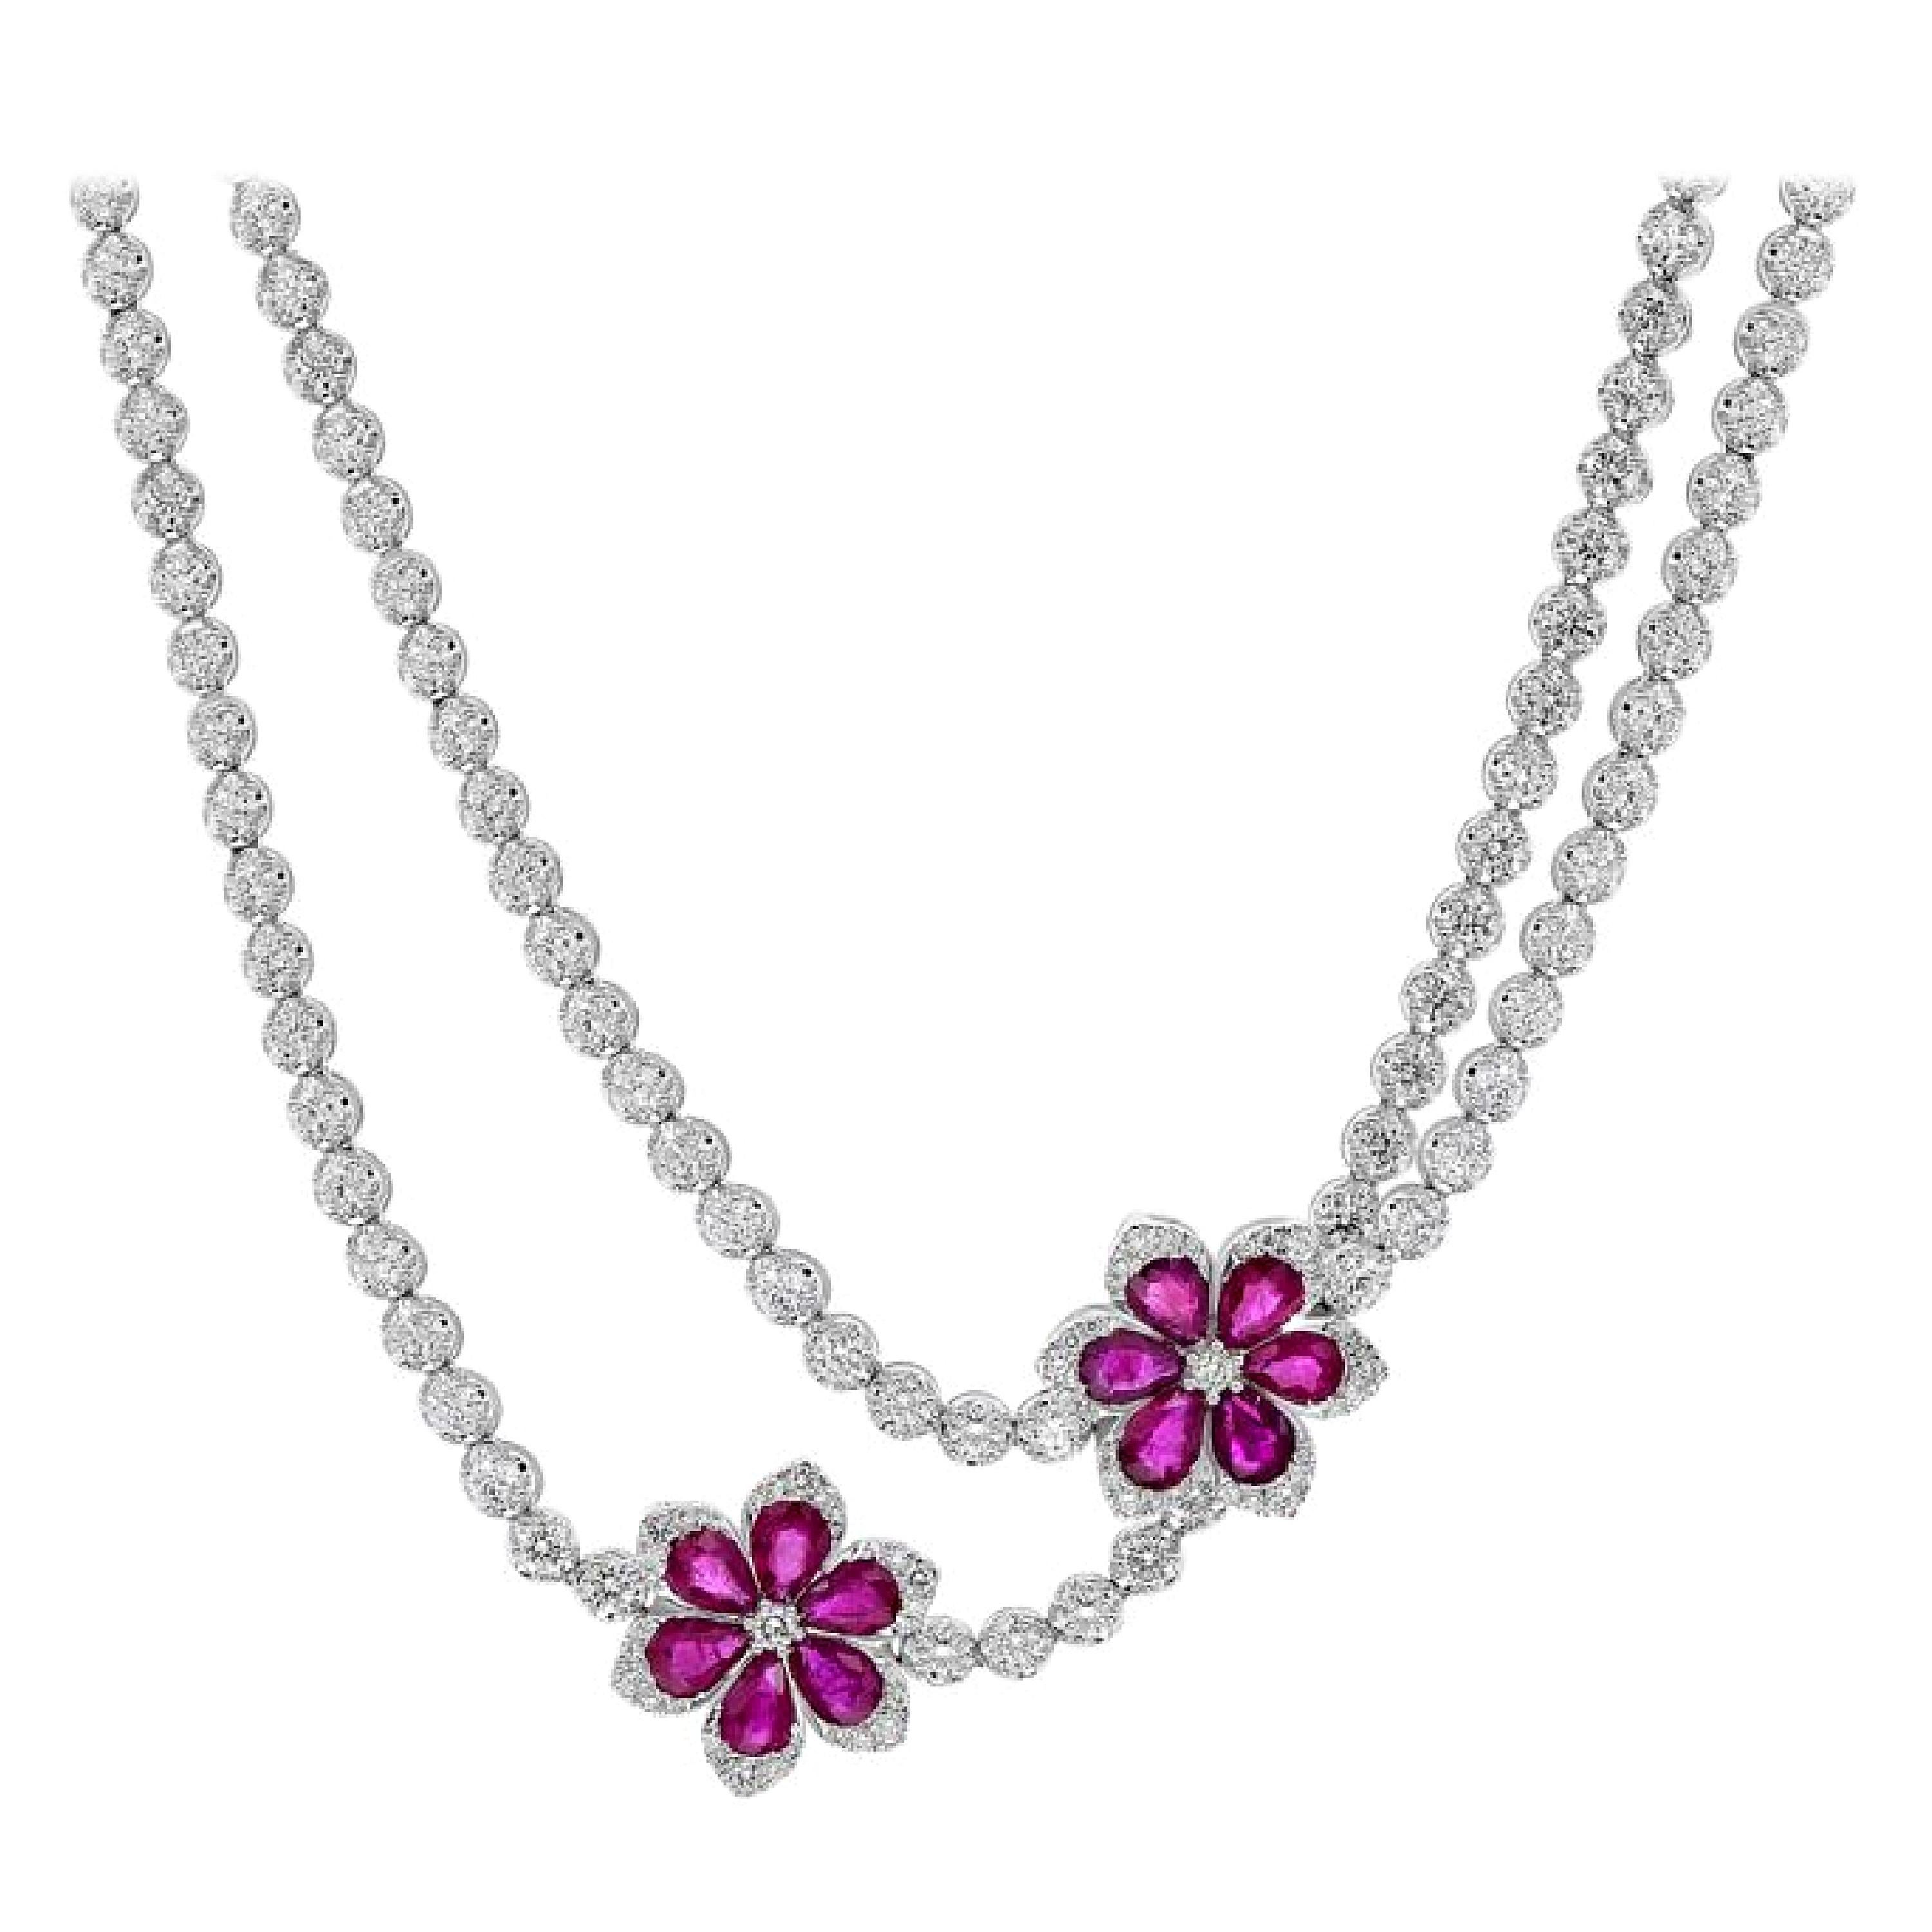 Stunning Opera length ruby and diamond necklace is 32